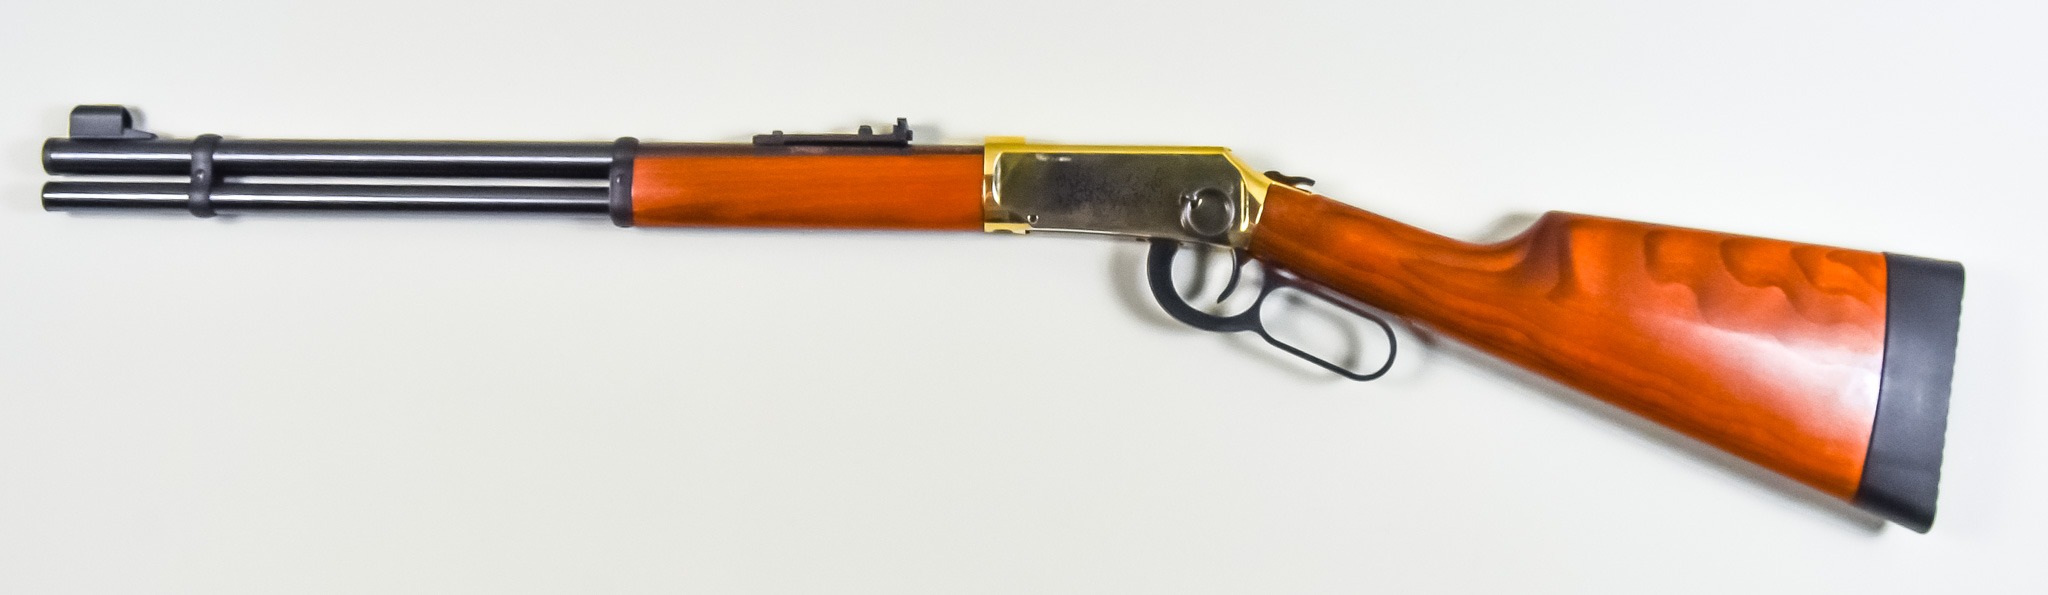 A .177 Calibre CO2 Air Rifle, 20th Century, by Walther, Model Lever Action, 20ins blued steel